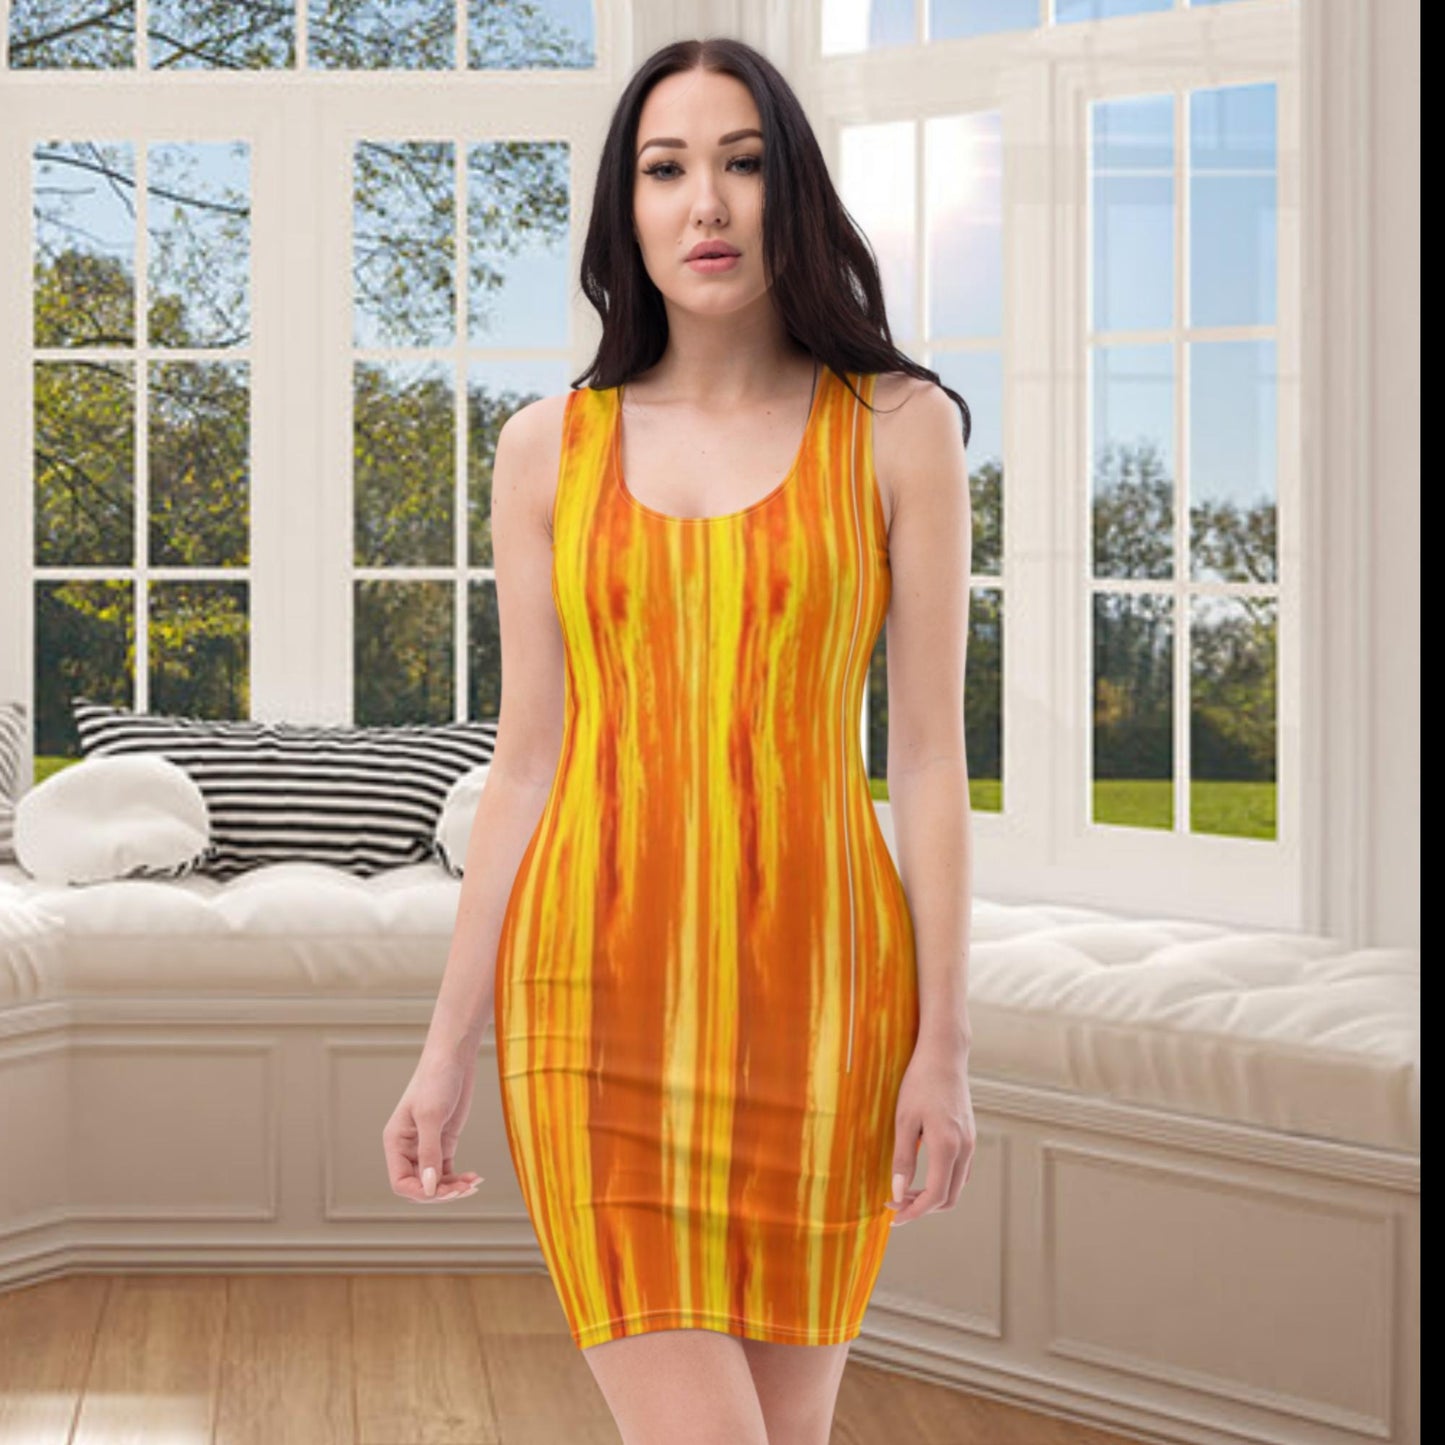 JAMAICAN SUNSET - Sexy Fitted Body Dress